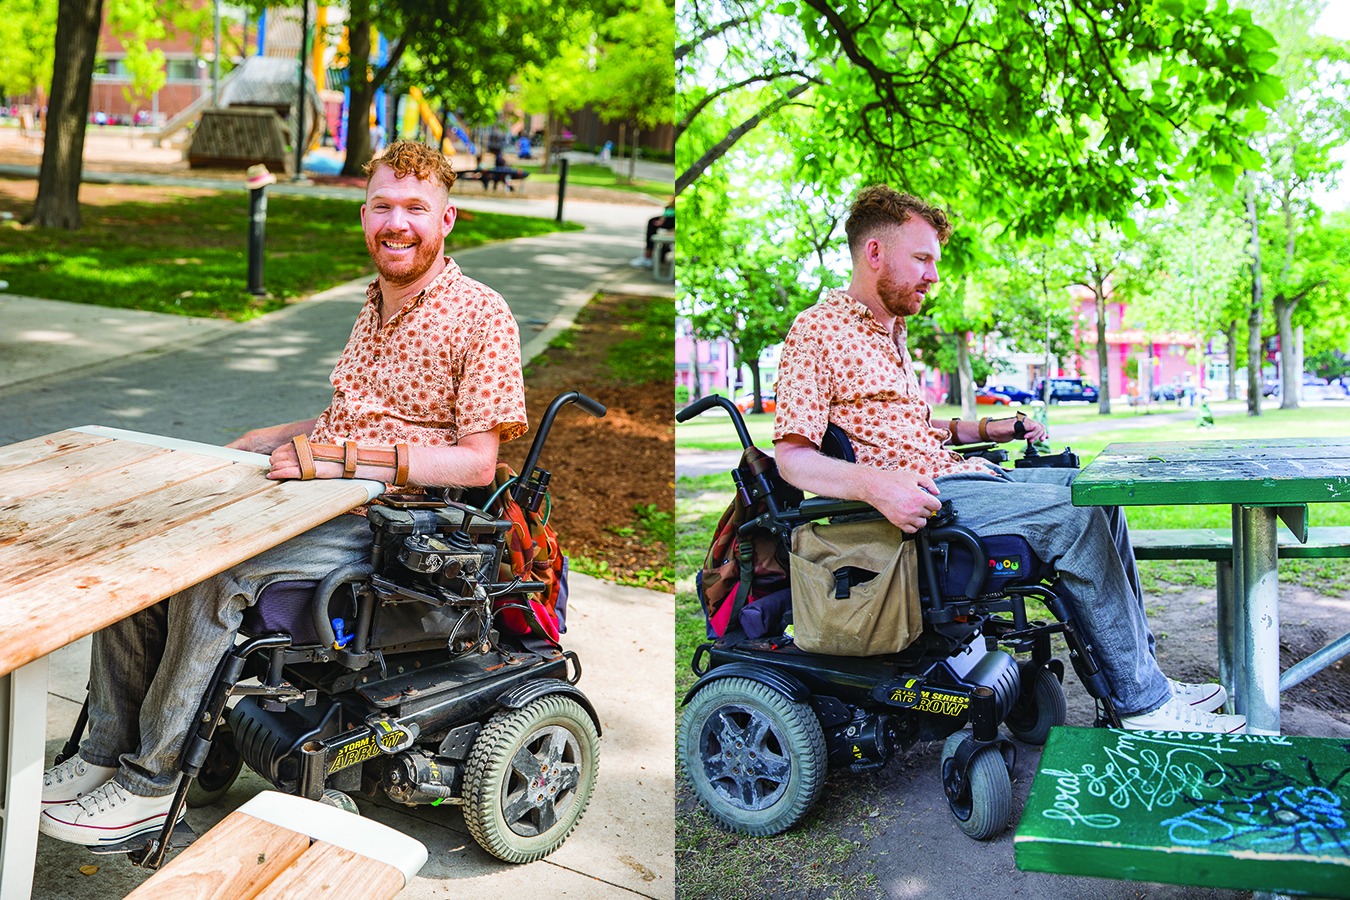 Two photos side by side: the first shows Anderson pulled up to an accessible picnic table, while the second shows a photo of him unable to reach the table of another, less accessible picnic table.